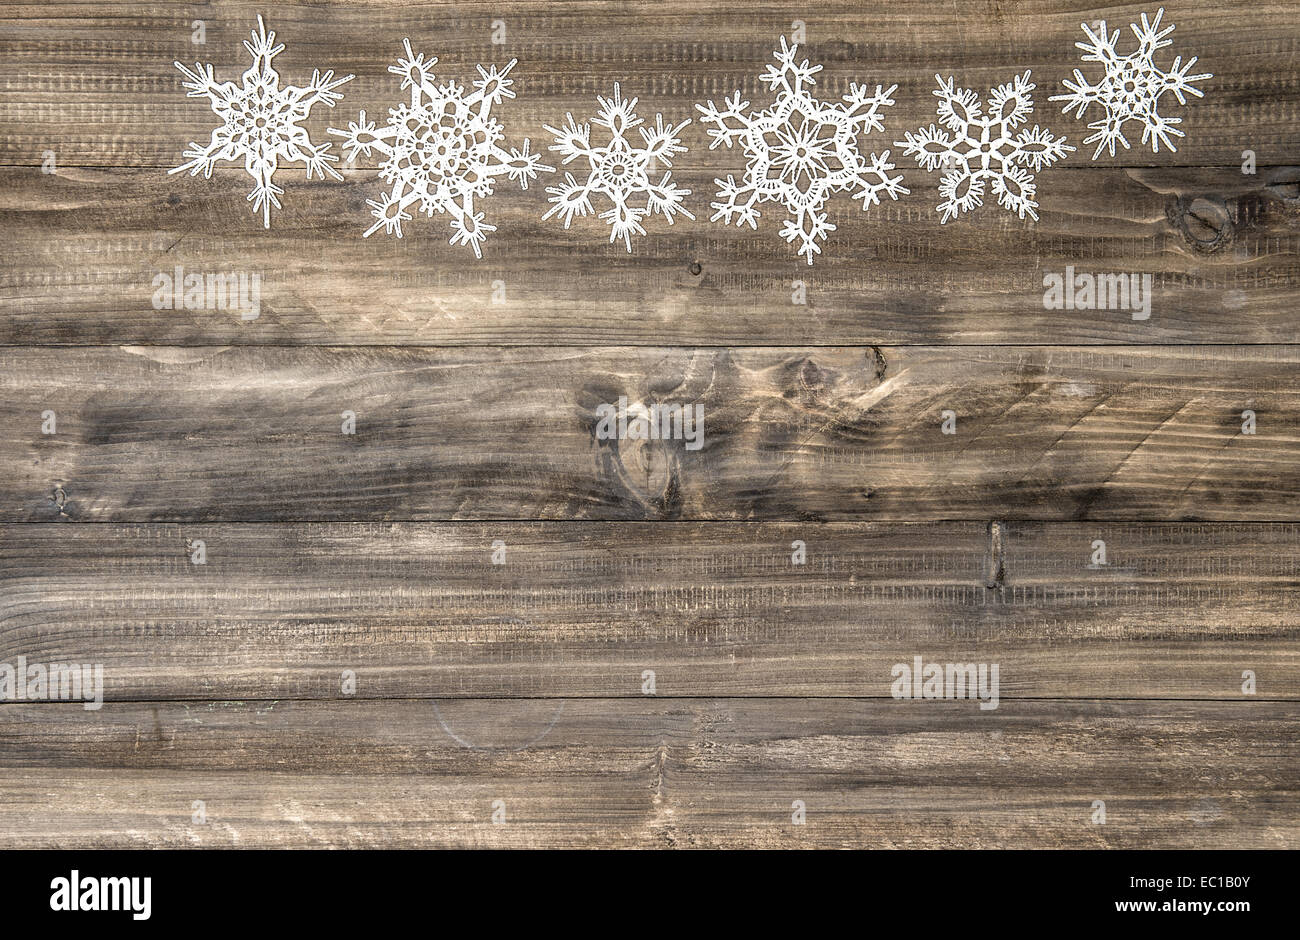 christmas ornament white snowflakes on rustic wooden background. festive decoration Stock Photo